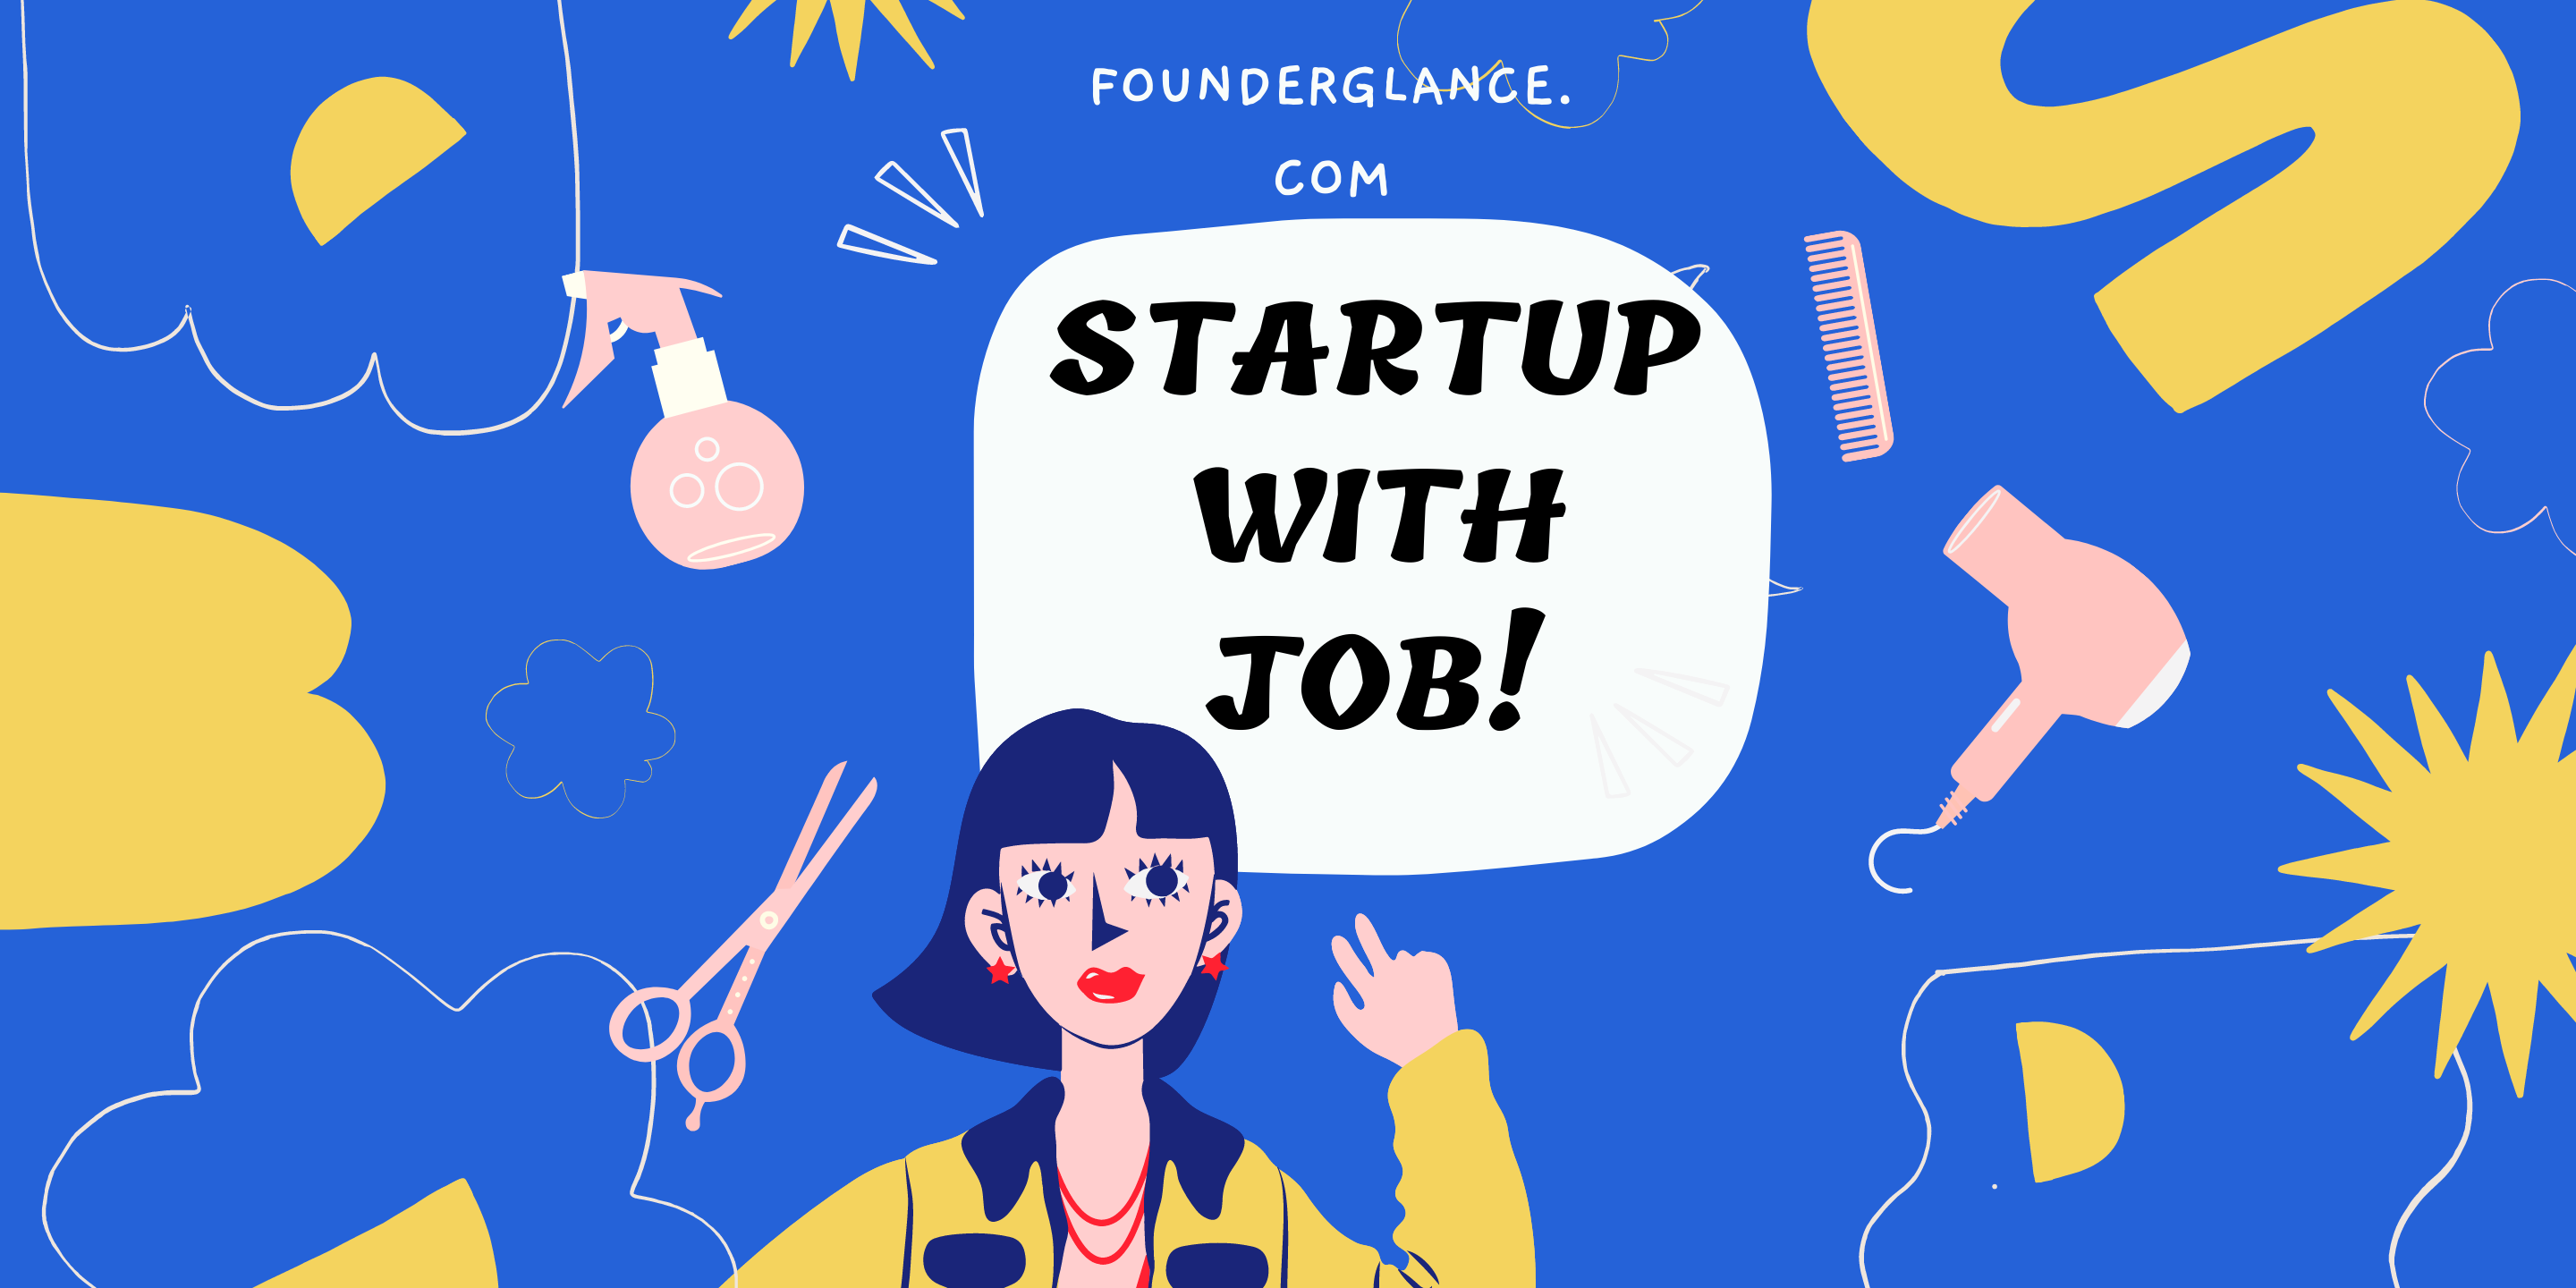 STARTUP WITH JOB